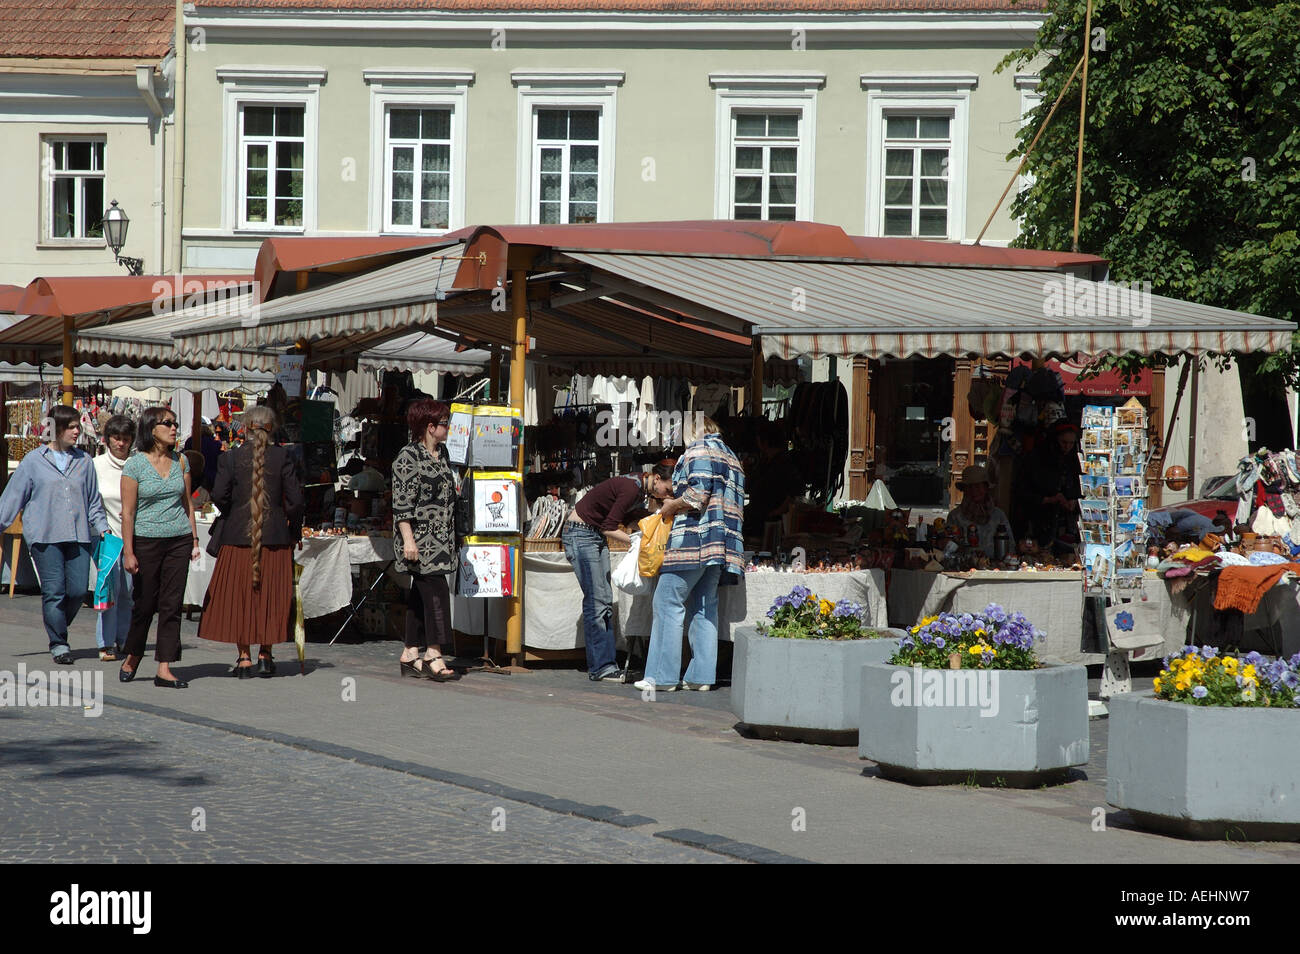 street market in the old town area of Vilnius, Lithuania. Stock Photo